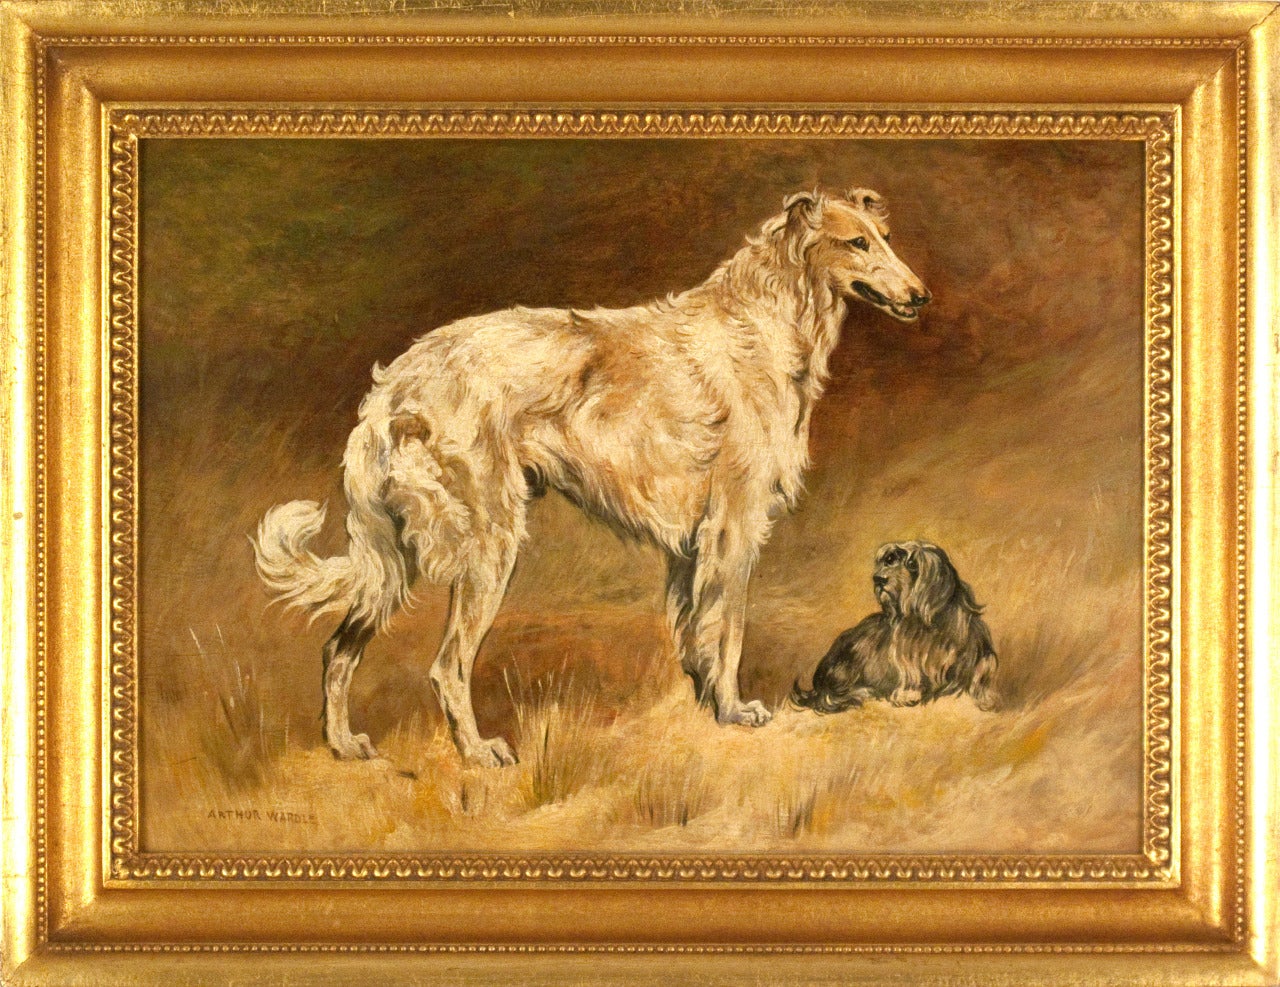 Borzoi and Skye Terrier, Property of Her Majesty, Queen Alexandra - Painting by Arthur Wardle